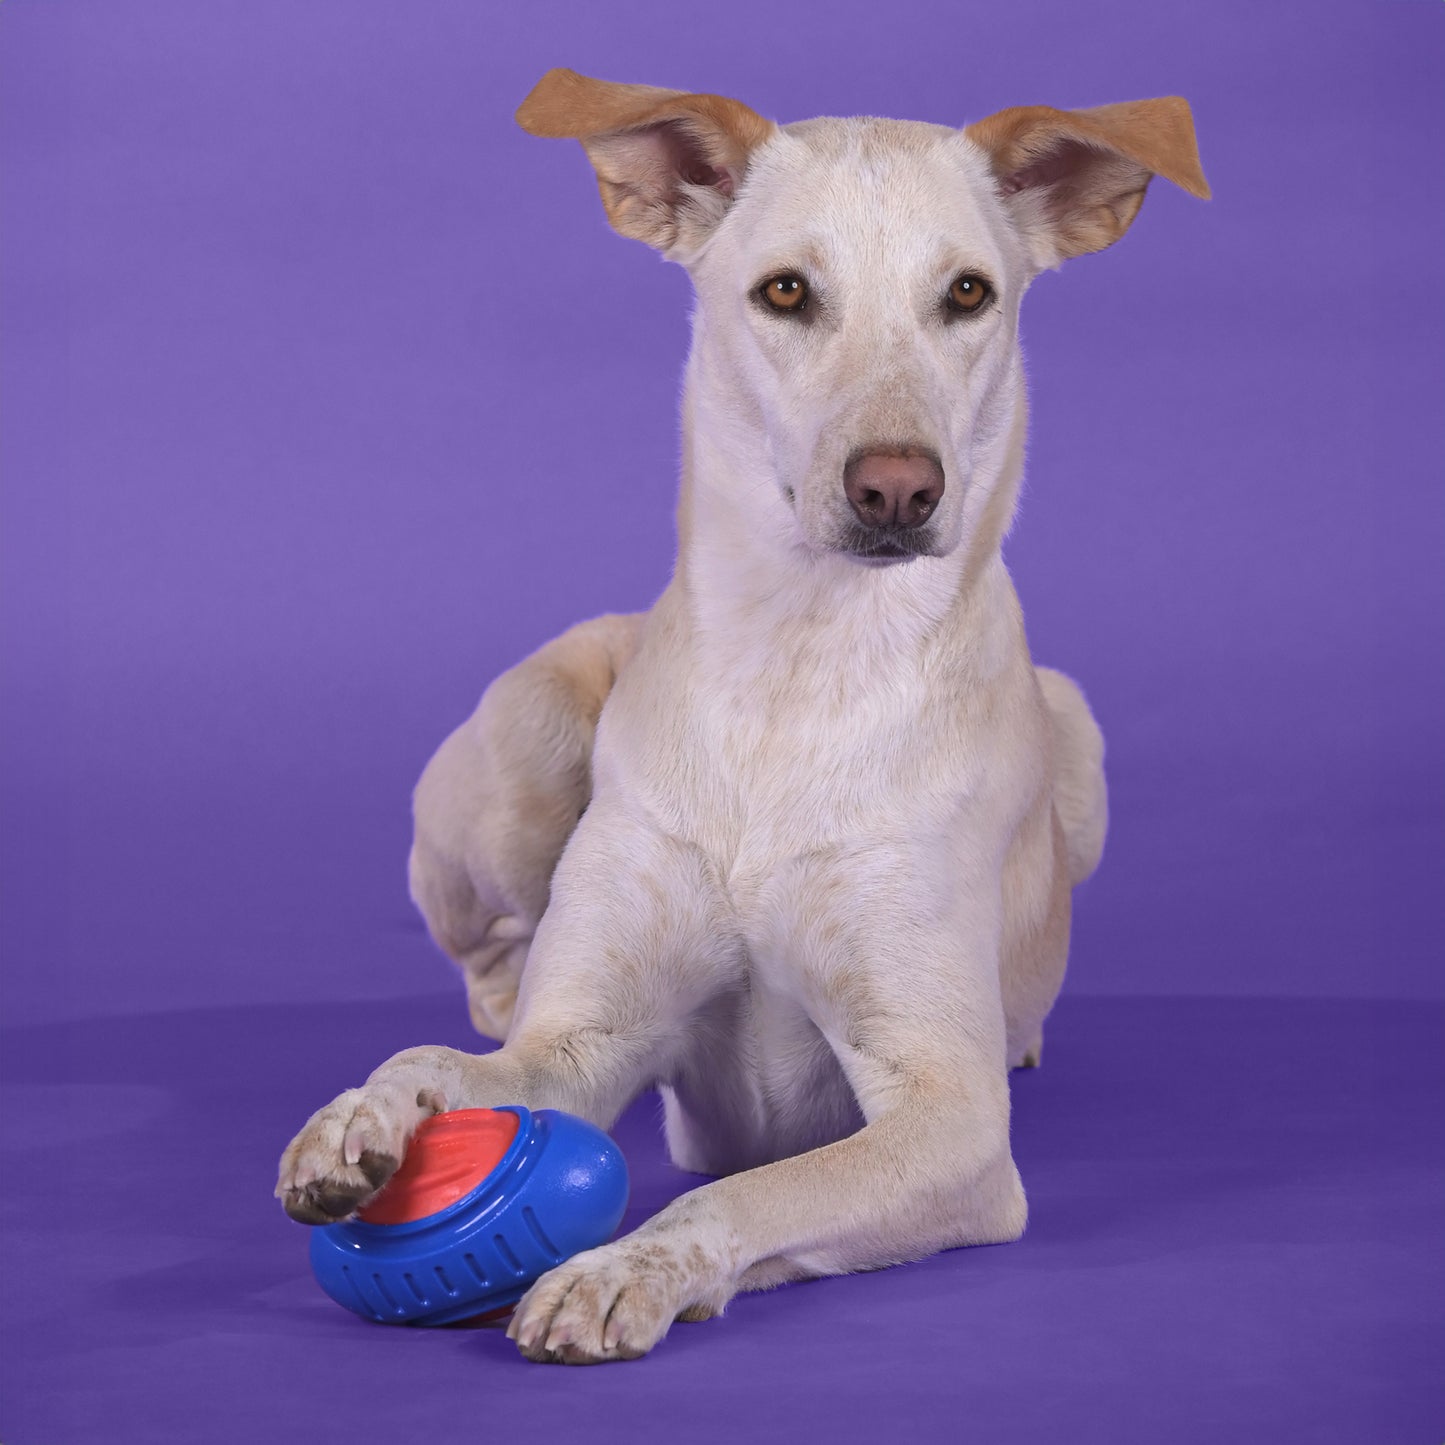 Dash Dog Sprinter Fetch Toy For Dog - Blue & Red - S - Heads Up For Tails